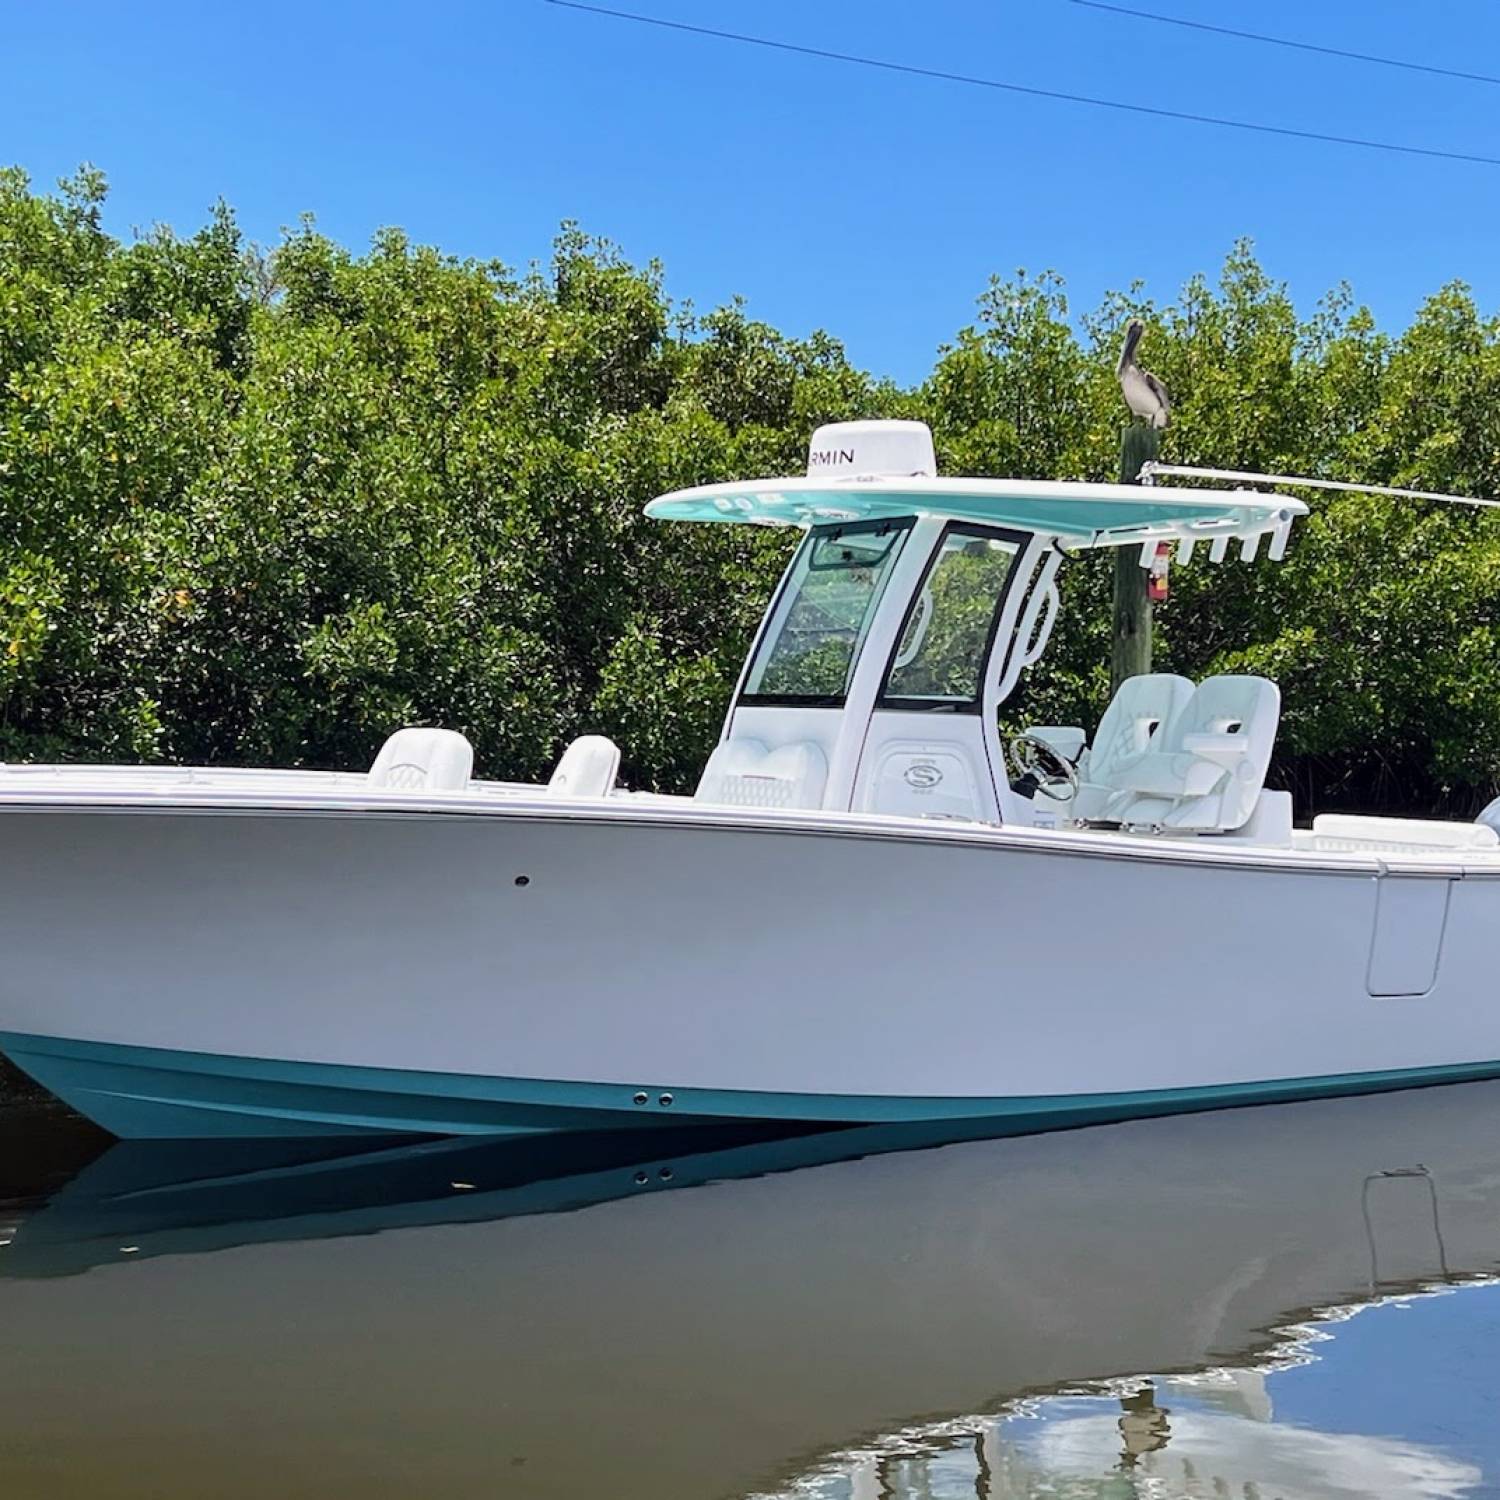 Title: 262 Delivery - On board their Sportsman Open 262 Center Console - Location: Thunder Marine. Participating in the Photo Contest #SportsmanJanuary2023